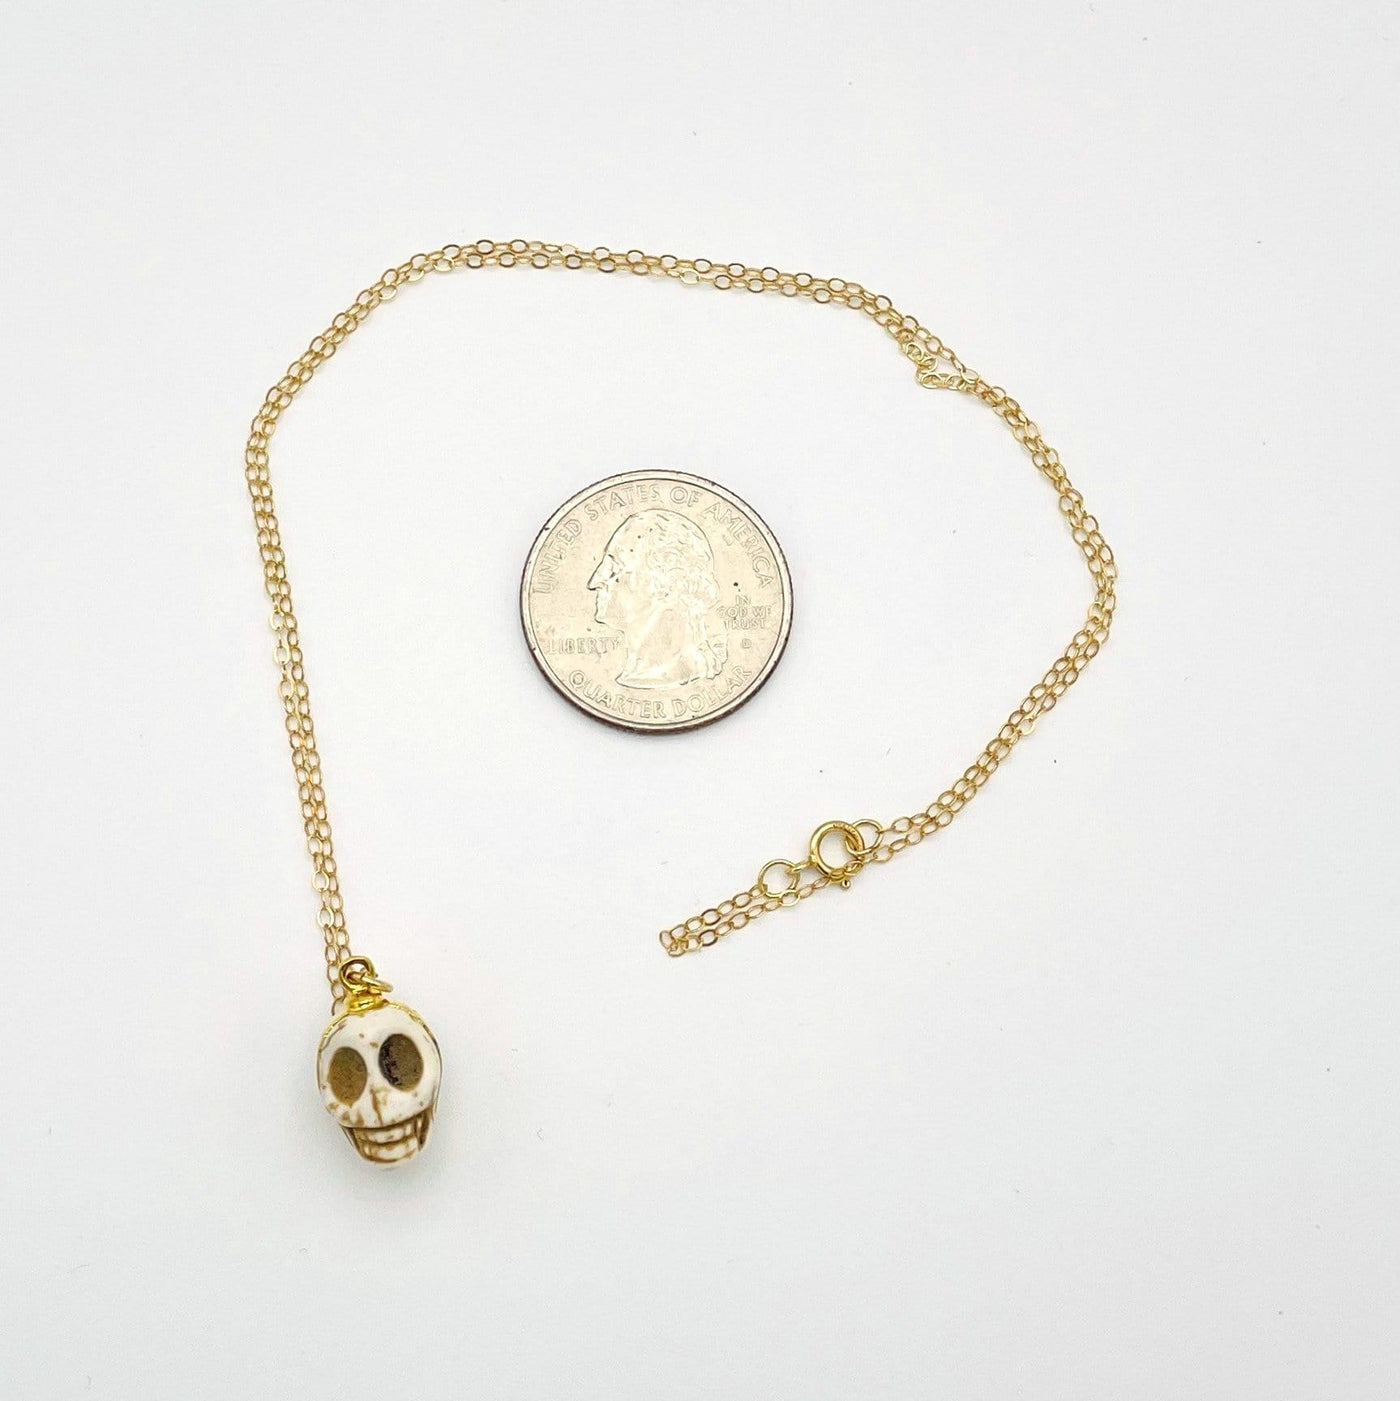 whole white howlite skull pendant necklace on white background with quarter for size reference